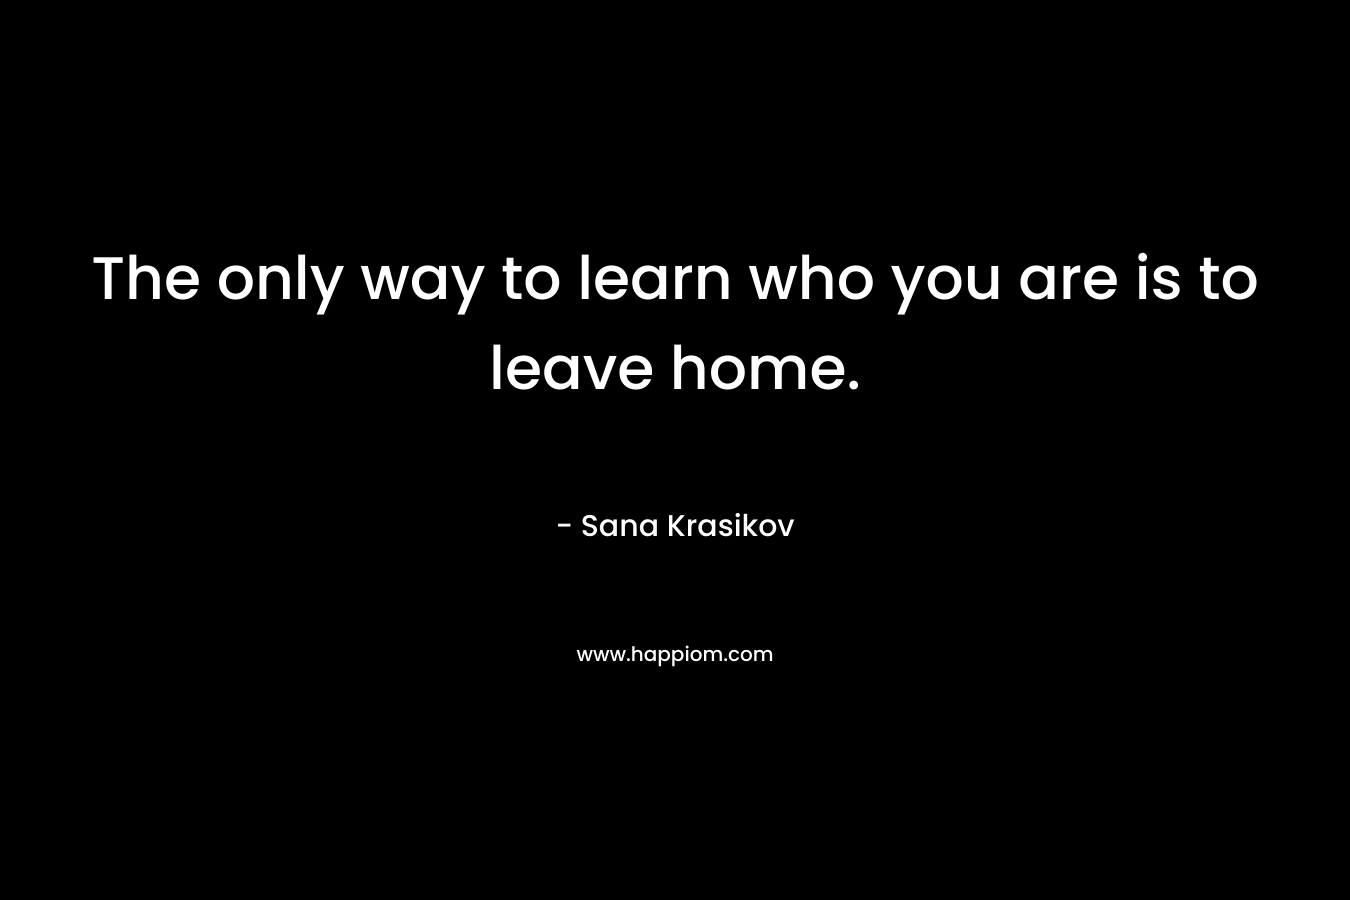 The only way to learn who you are is to leave home.